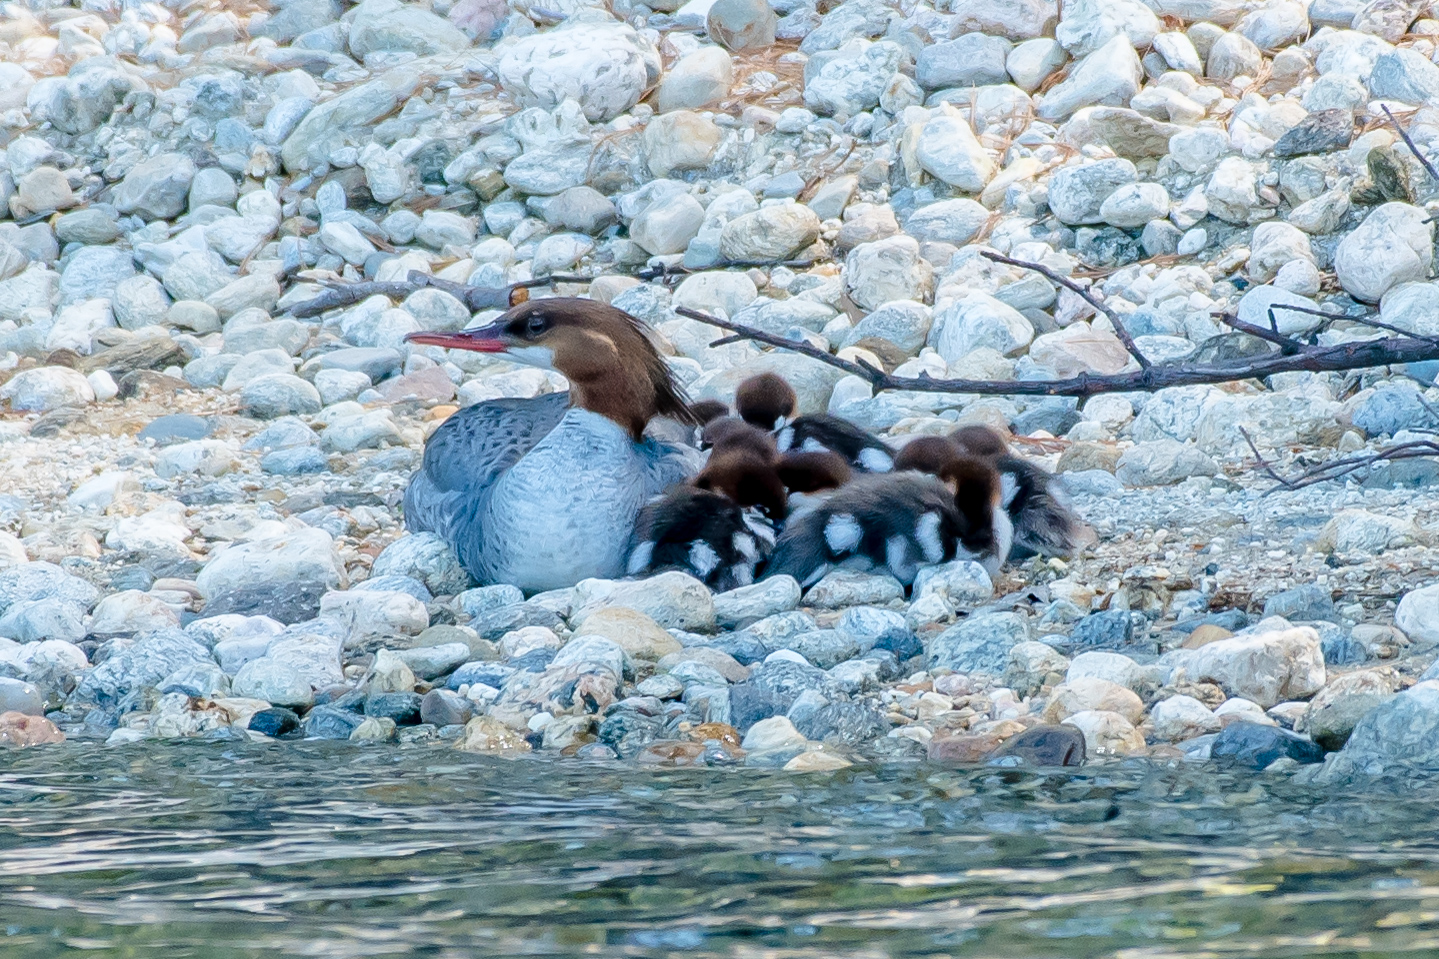   Here is another family of common merganser ducks resting with mom today along the Quabbin shore. &nbsp;Baby birds popping up everywhere! &nbsp;5/31/16  